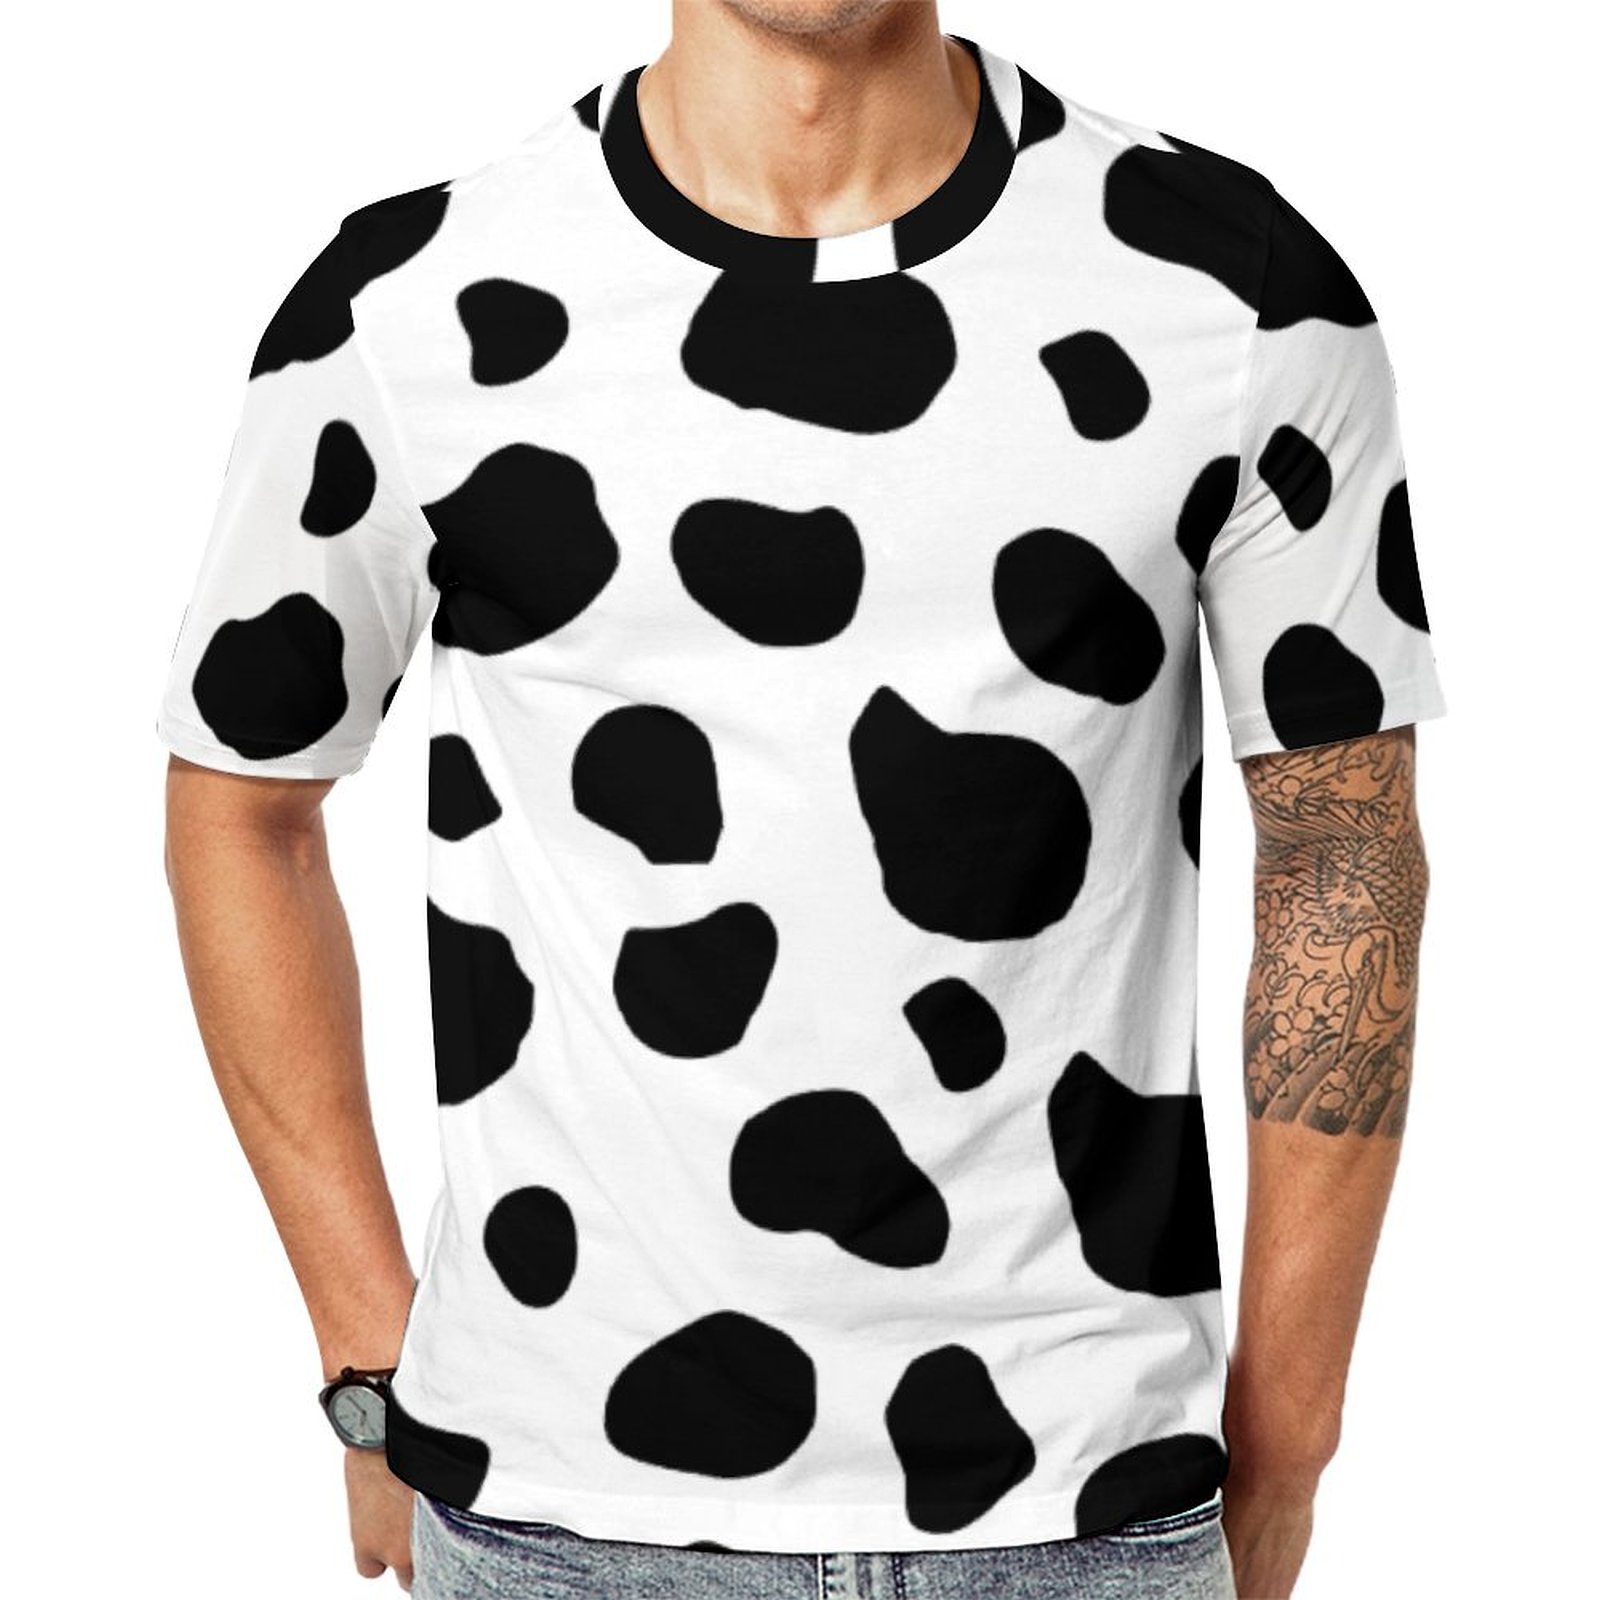 Cow Print Cow Cow Spots Black And White Short Sleeve Print Unisex Tshirt Summer Casual Tees for Men and Women Coolcoshirts